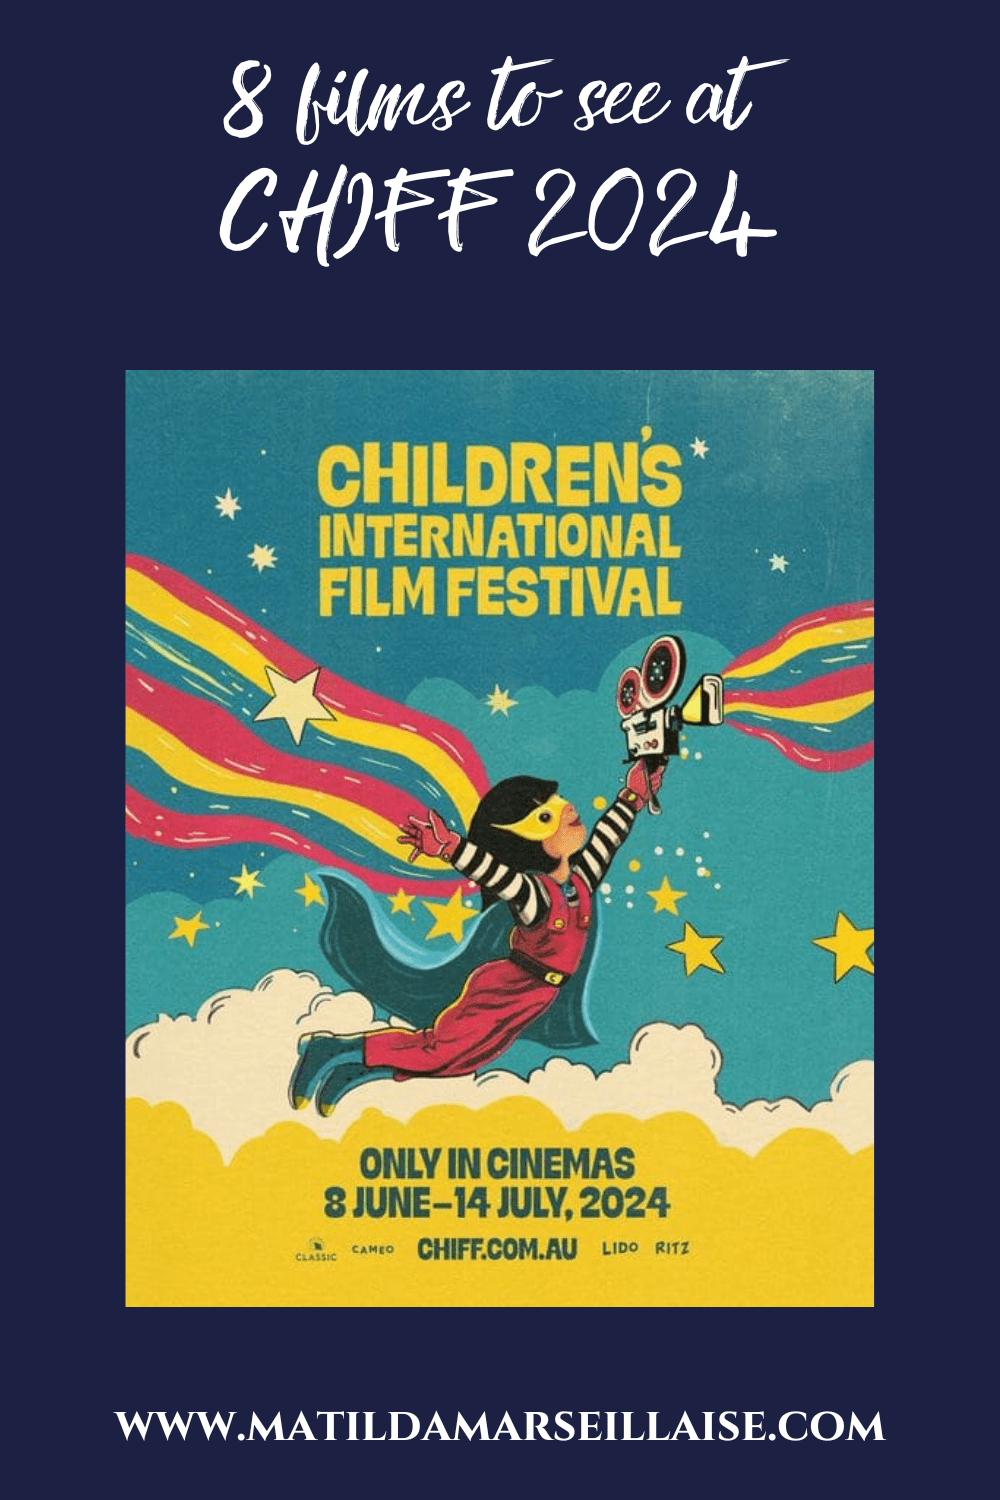 CHIFF 2024 is here: a film festival for kids with plenty of French films